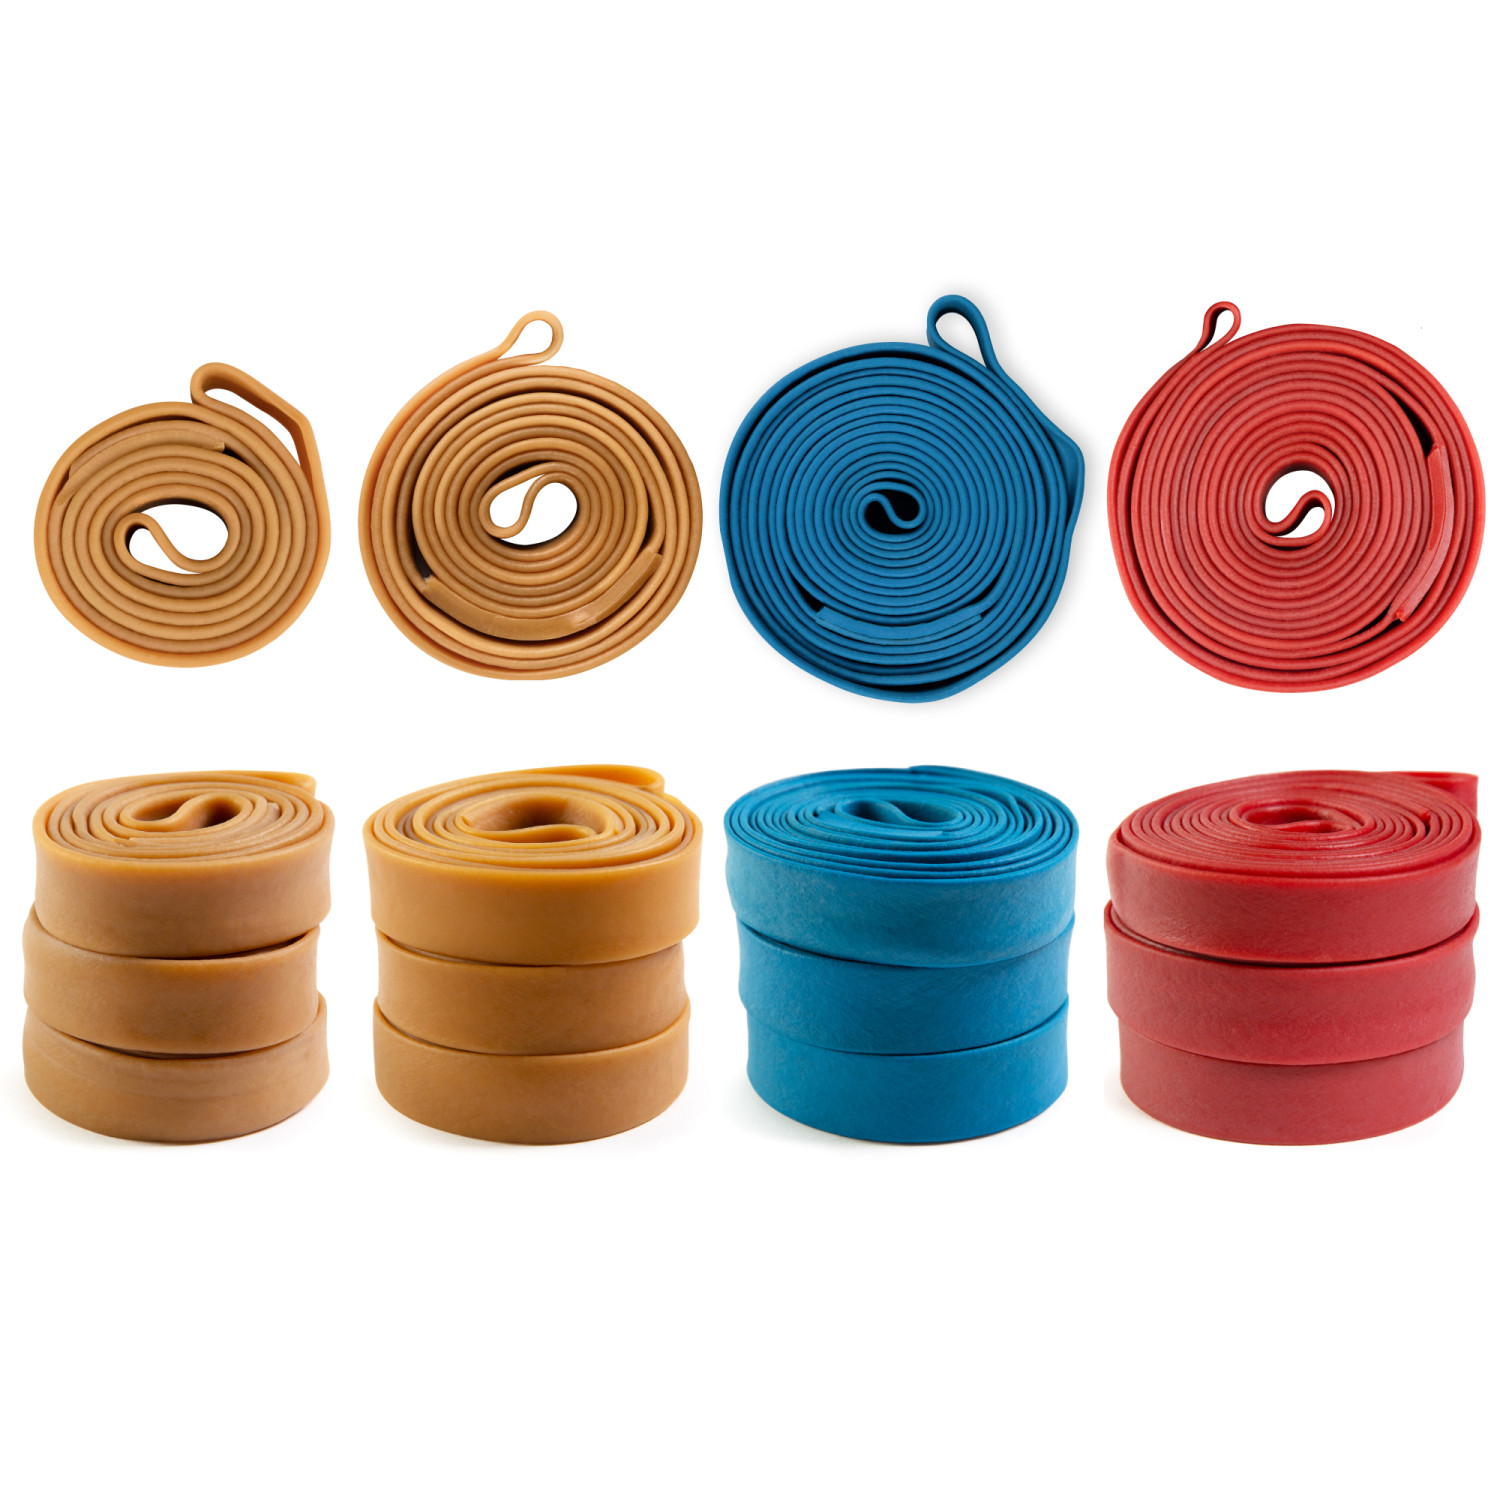 https://idlpack.com/image/cache/catalog/Products/Movers%20Rubber%20Bands%20/set%204%20each-1500x1500.jpg